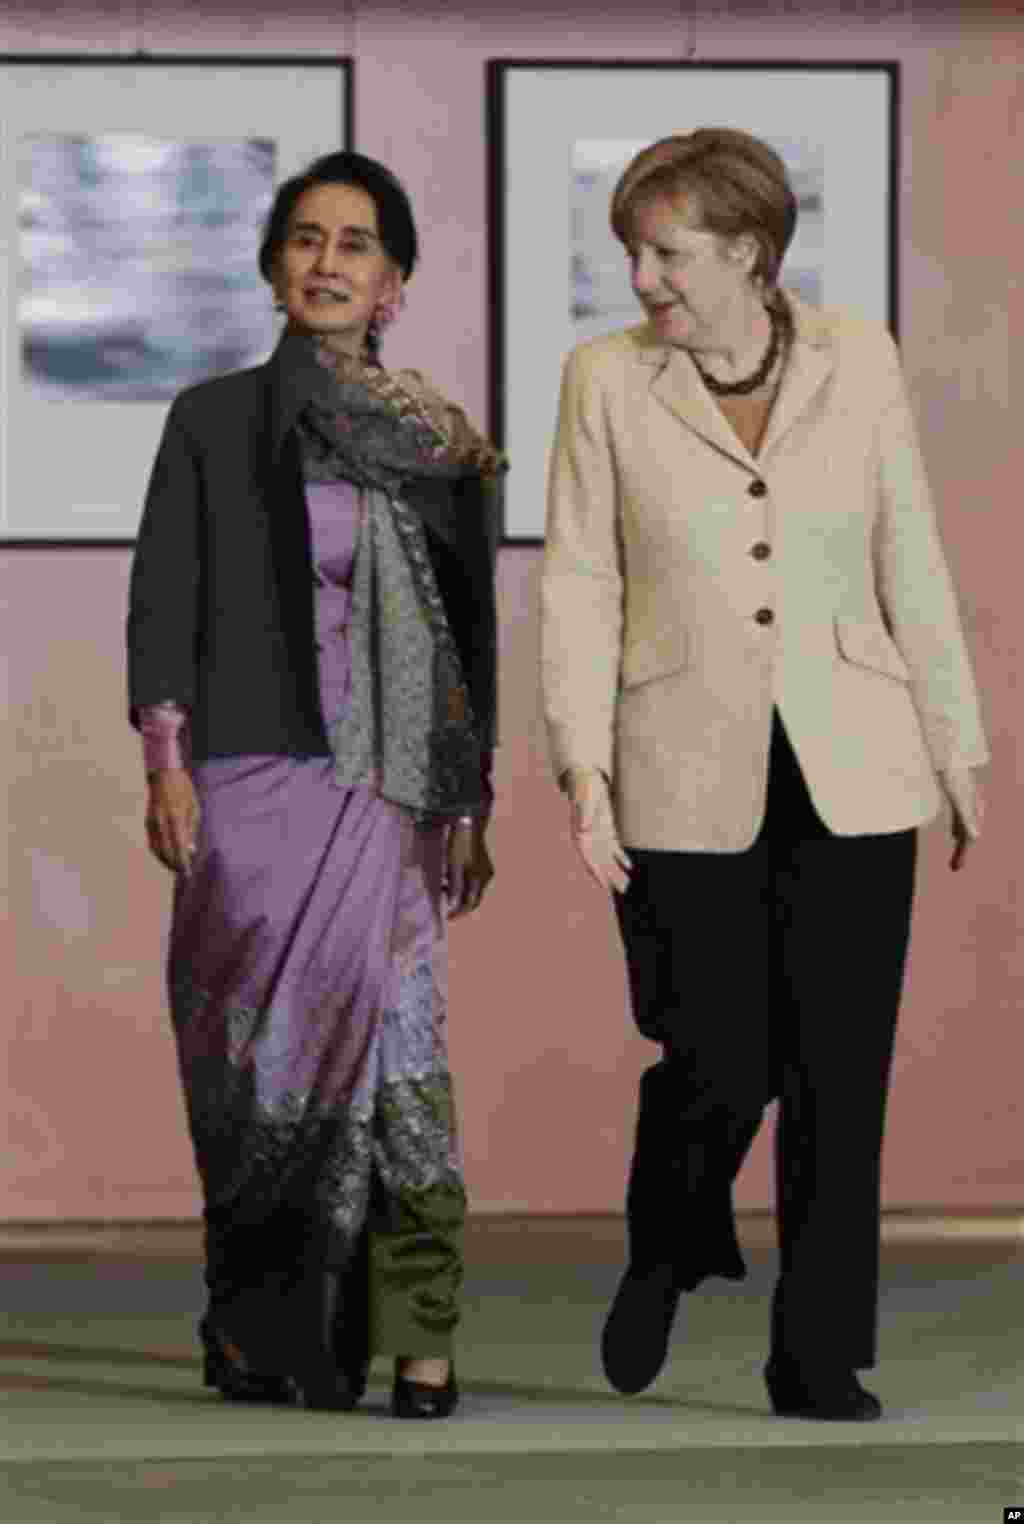 German Chancellor Angela Merkel, right, welcomes Myanmar Opposition Leader Aung San Suu Kyi for a meeting at the chancellery in Berlin, Germany, Thursday, April 10, 2014. (AP Photo/Markus Schreiber)